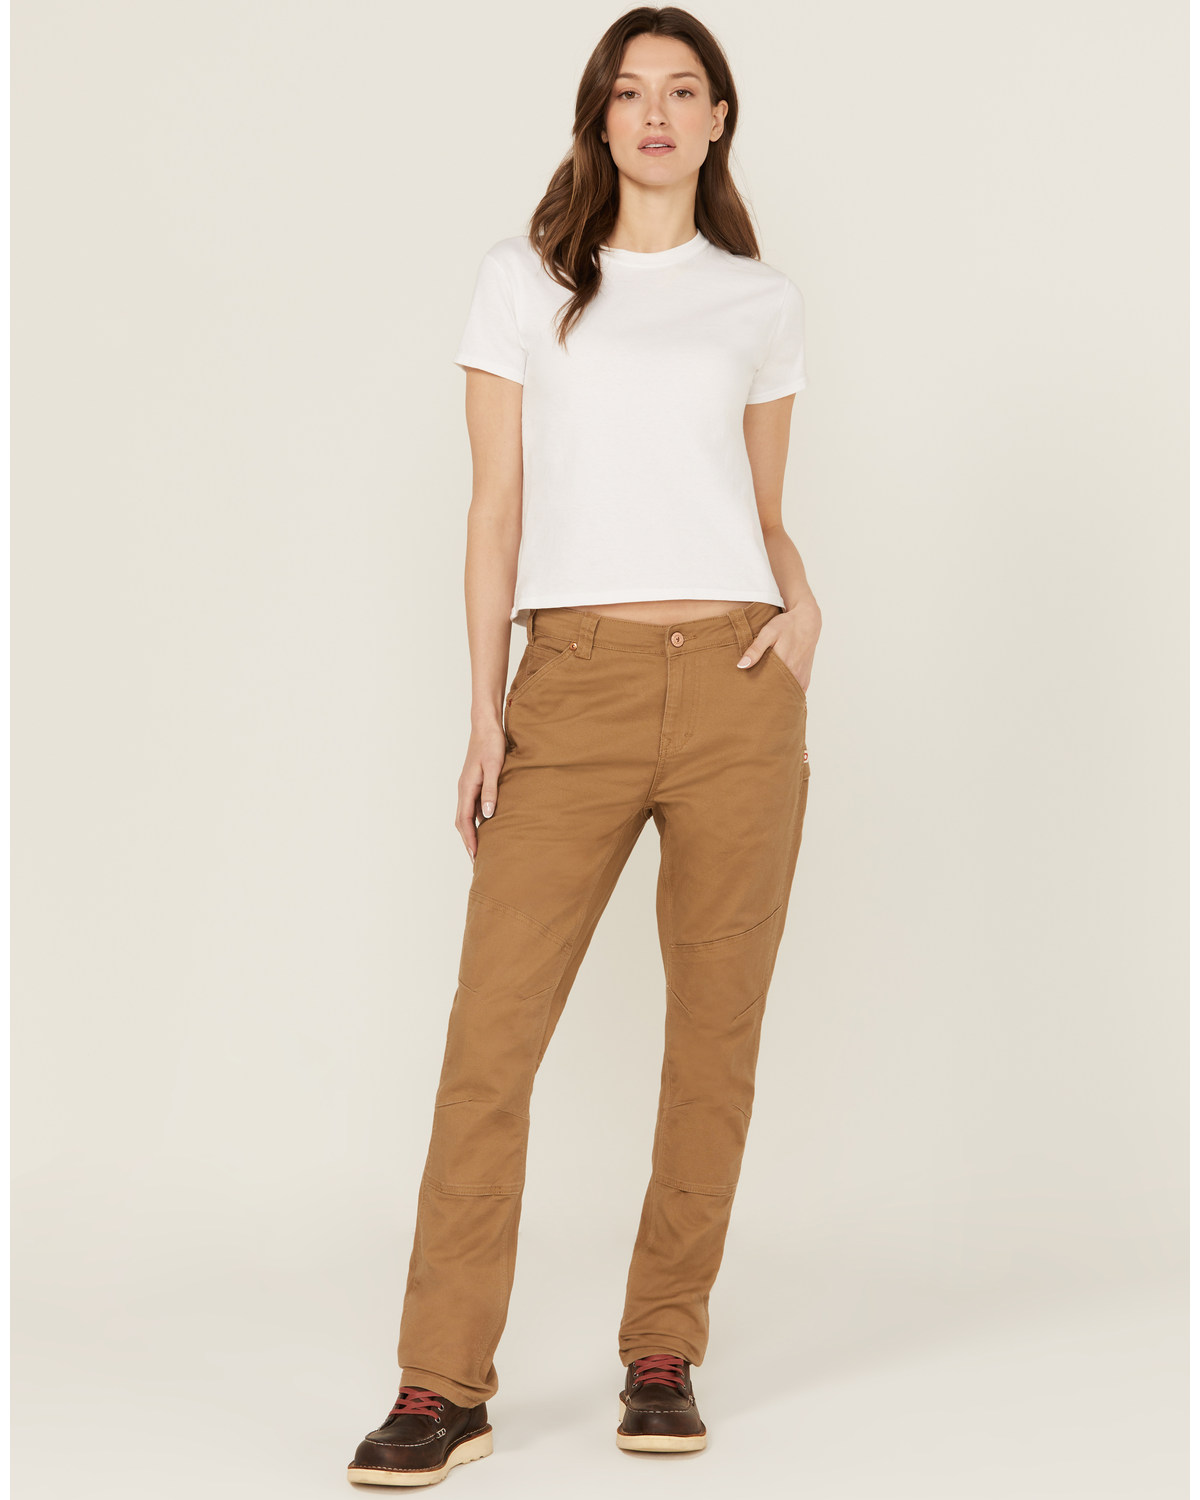 Dovetail Workwear Women's Go To Work Pants